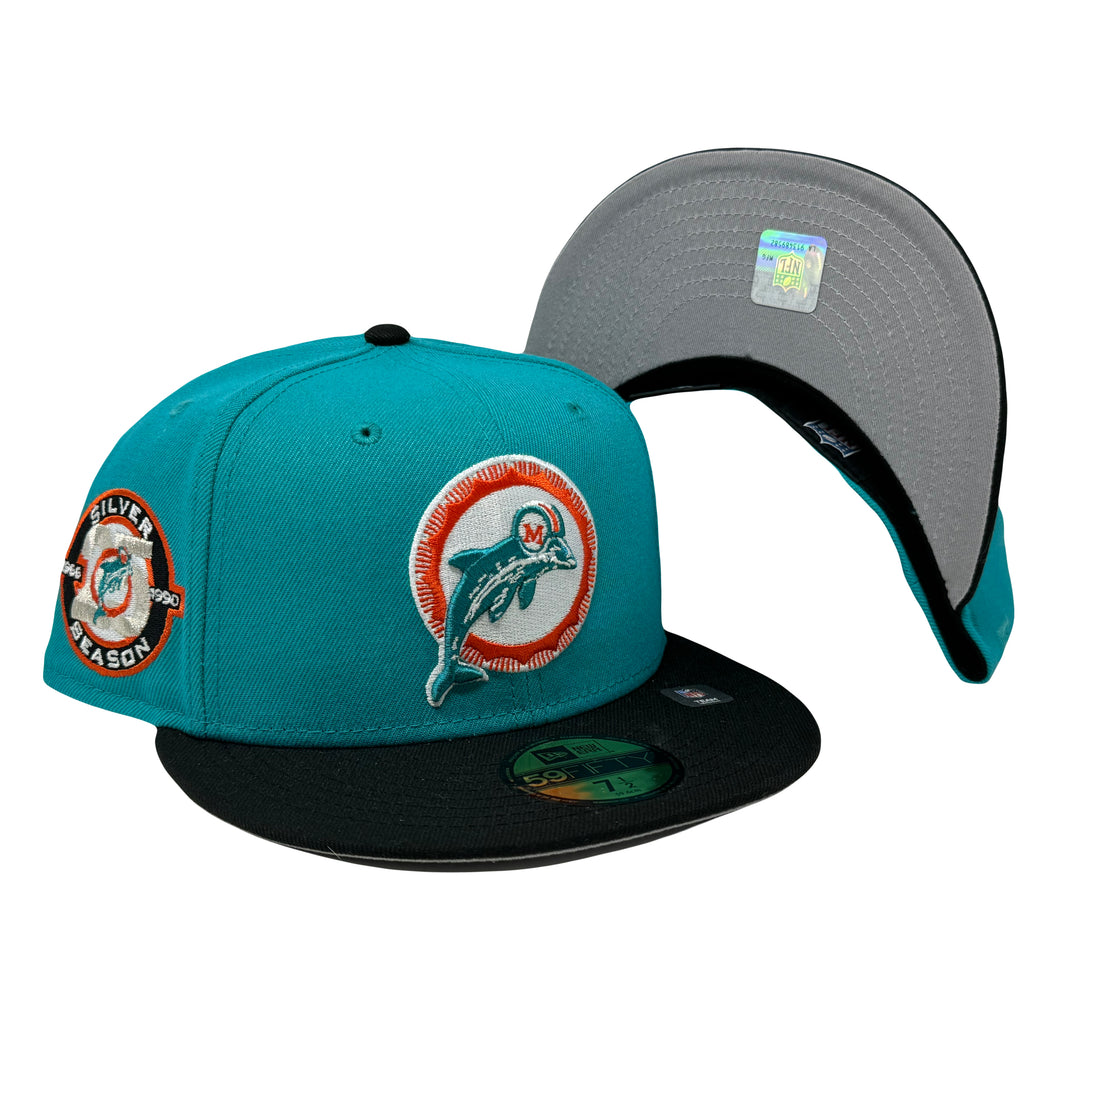 Miami Dolphins 25th Anniversary NFL 5950 New Era Fitted Hat